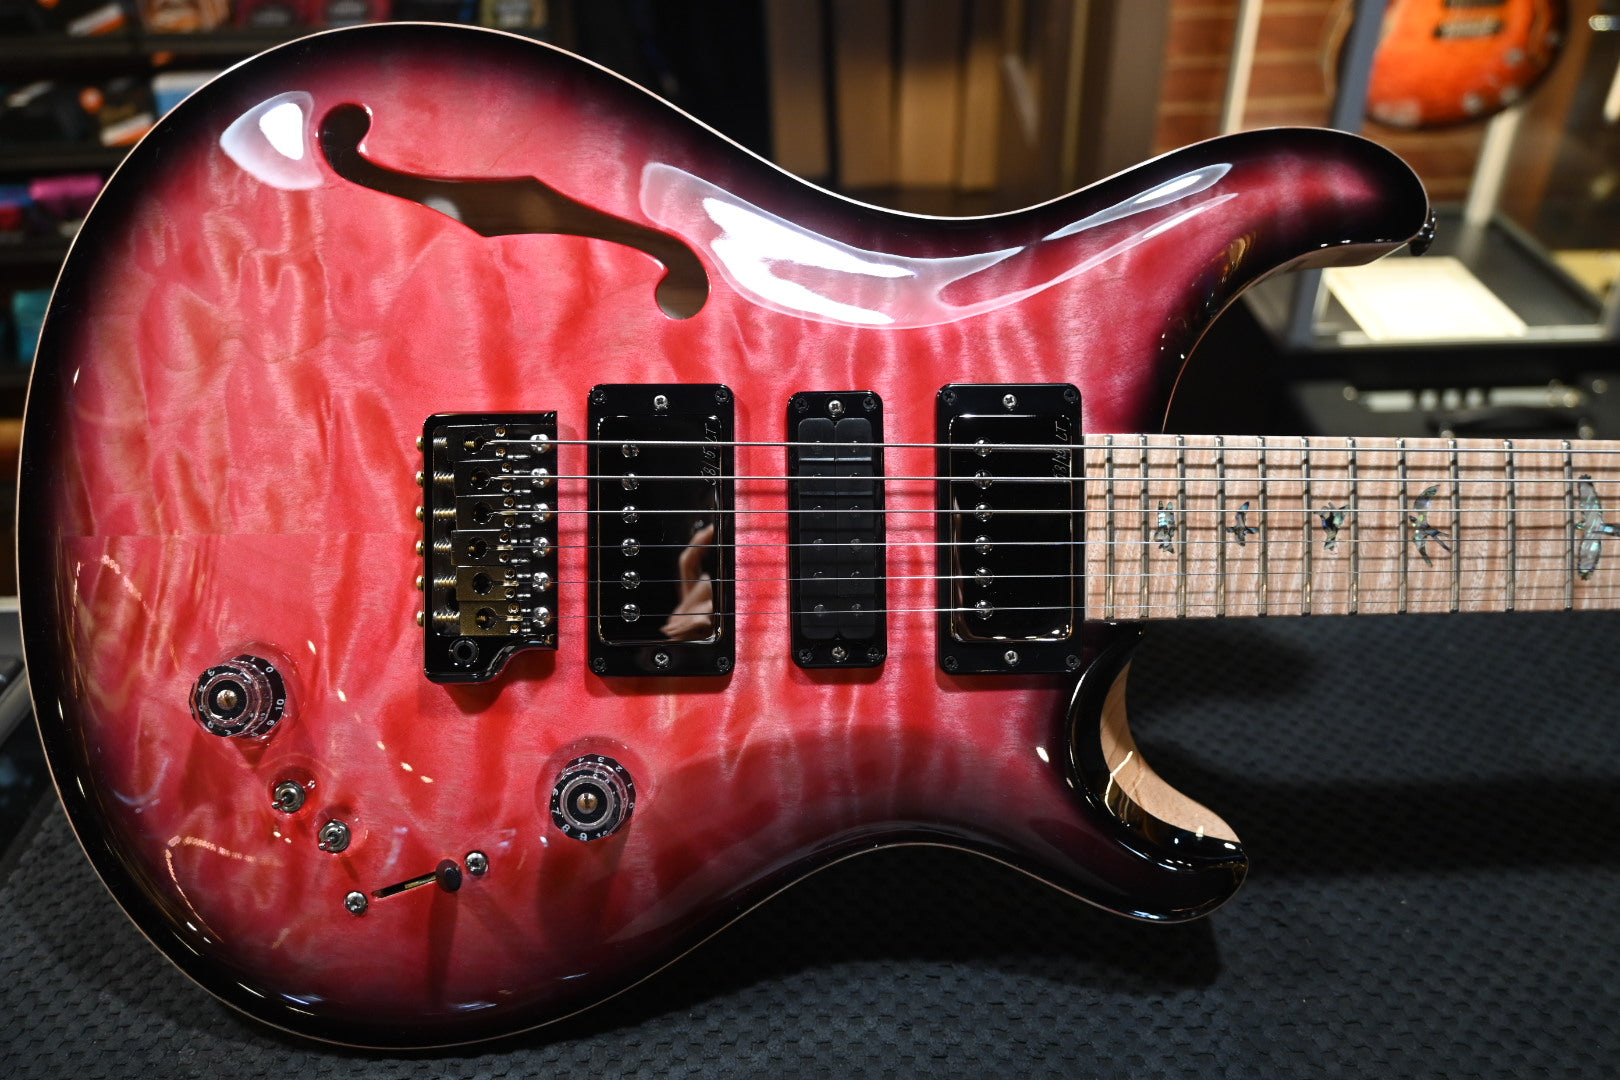 PRS Wood Library Special Semi-Hollow 10-Top Quilt - Bonni Pink Smokeburst Guitar #3307 - Danville Music